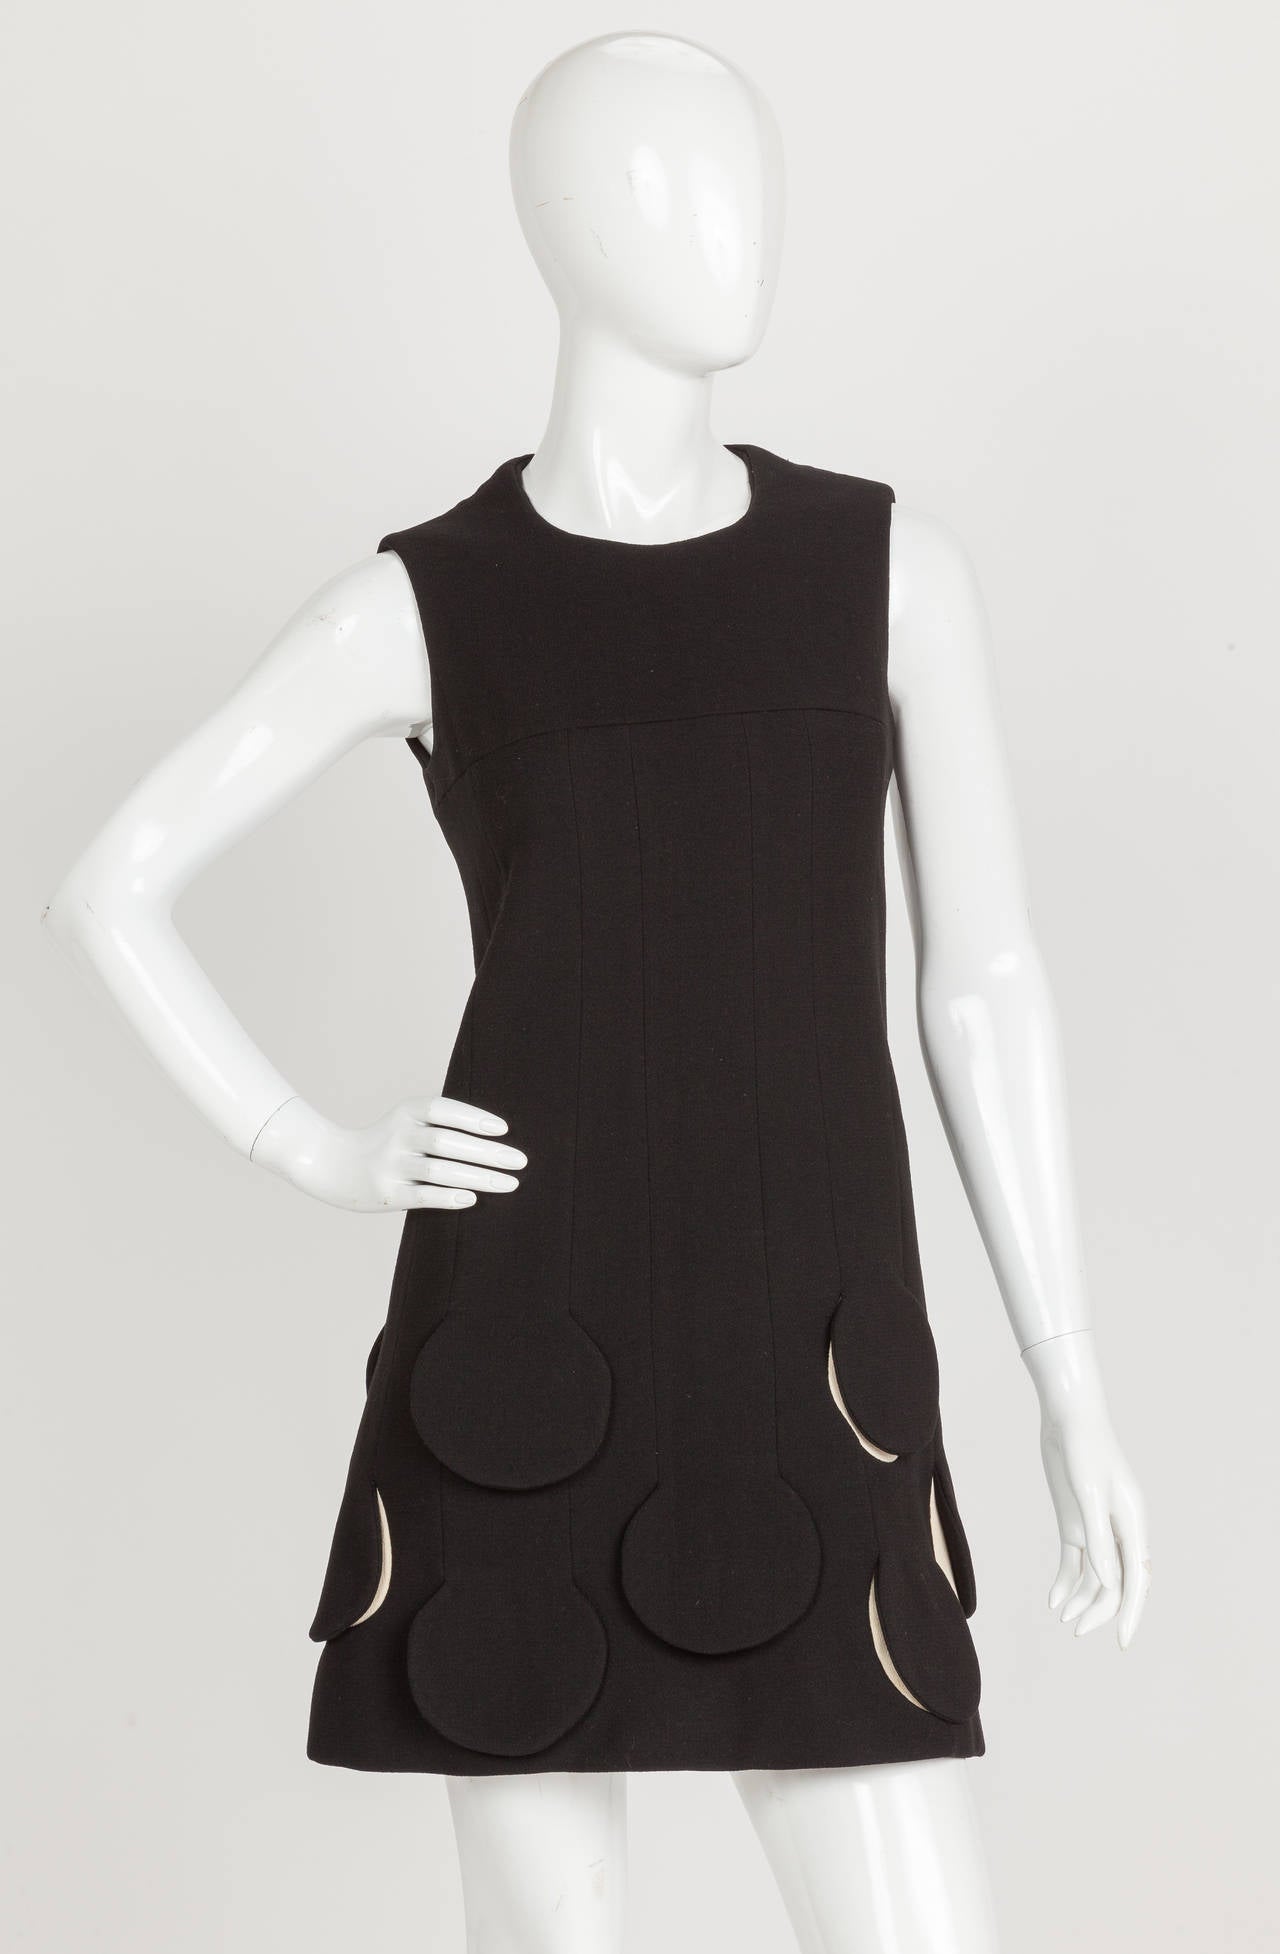 Circa 1967 - Pierre Cardin 'Rocket Dress' - a fitted black wool sleeveless dress that features  Space Age circle cutout/flaps at the hem. Lined entirely in silk and zippers to the left of center back In excellent condition. No size or fabric tag. My